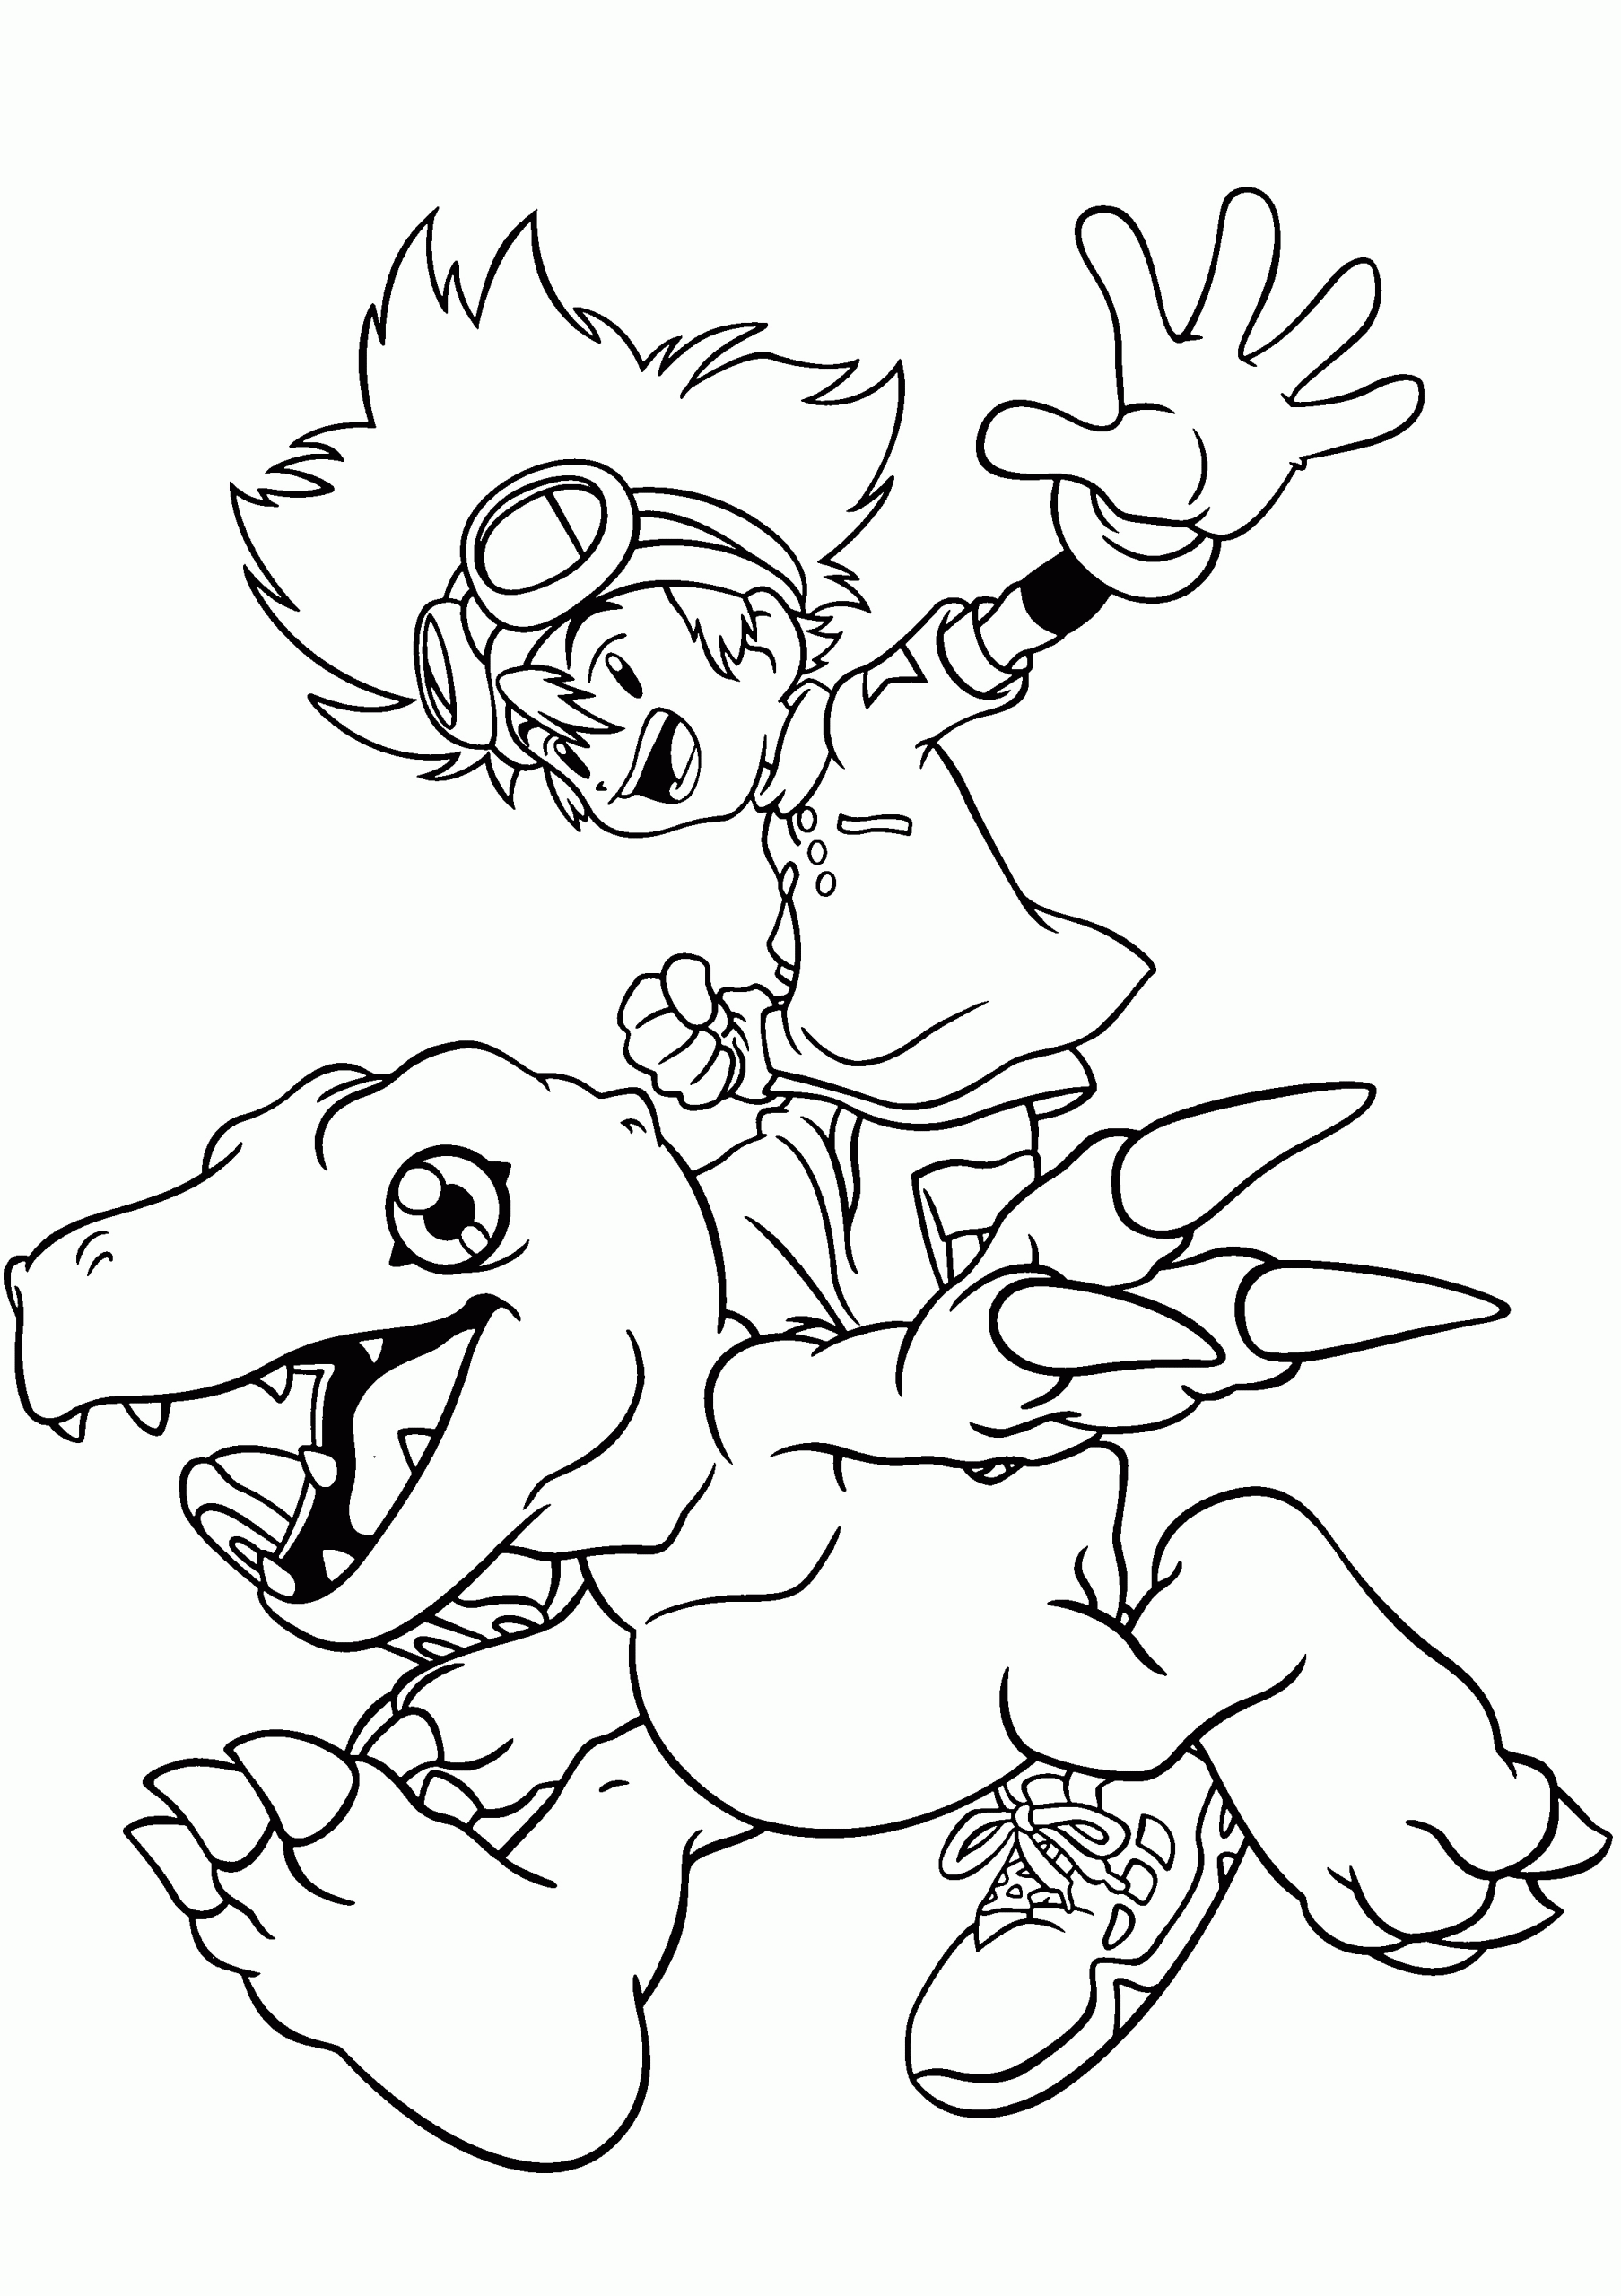 Coloring Pages For Toddlers To Print
 Free Printable Digimon Coloring Pages For Kids